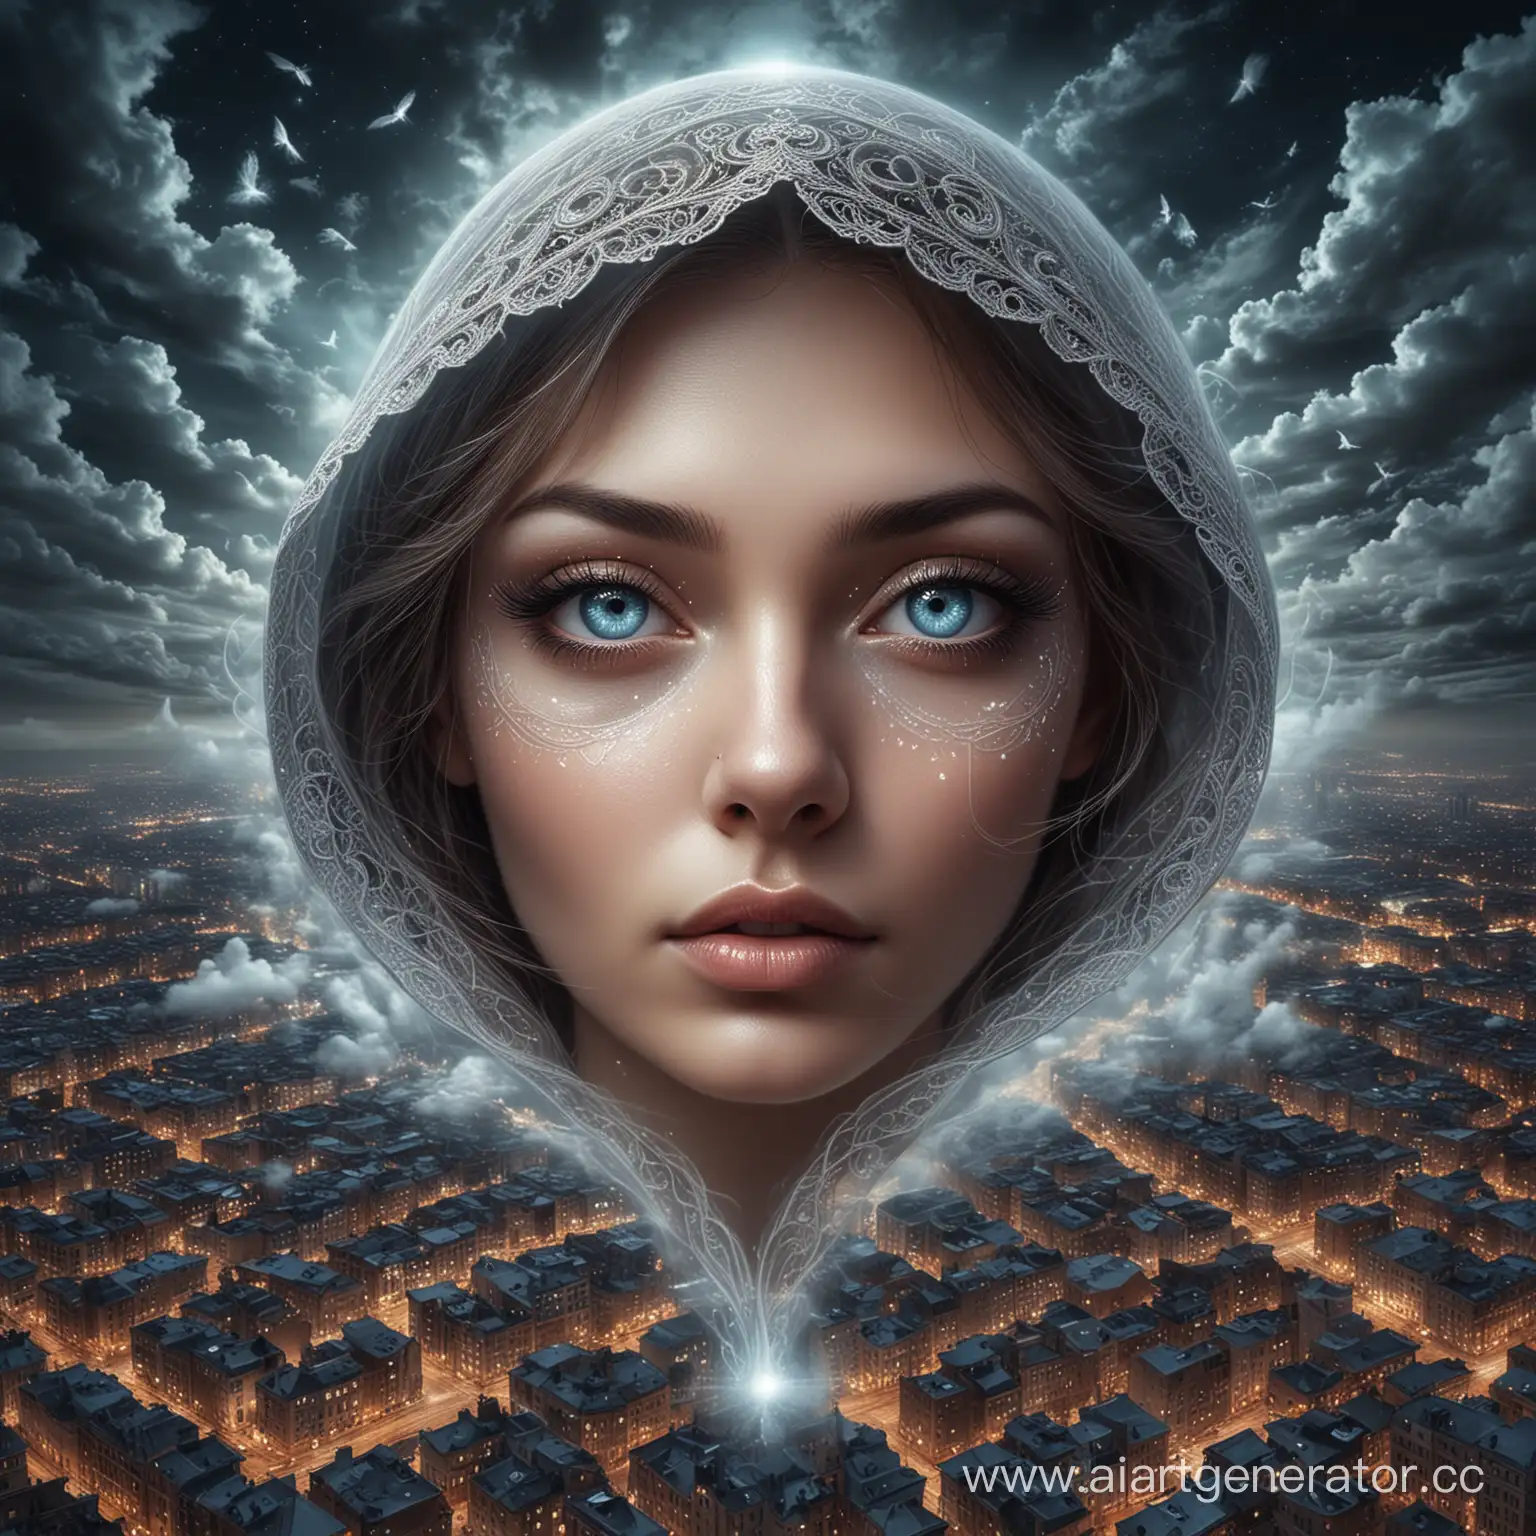 the illusion of beautiful,transparent female eyes in the clouds, above the night city, fantasy,mysticism,epic,surrealism,beautiful, filigree drawing of details,lots of details,HDR
